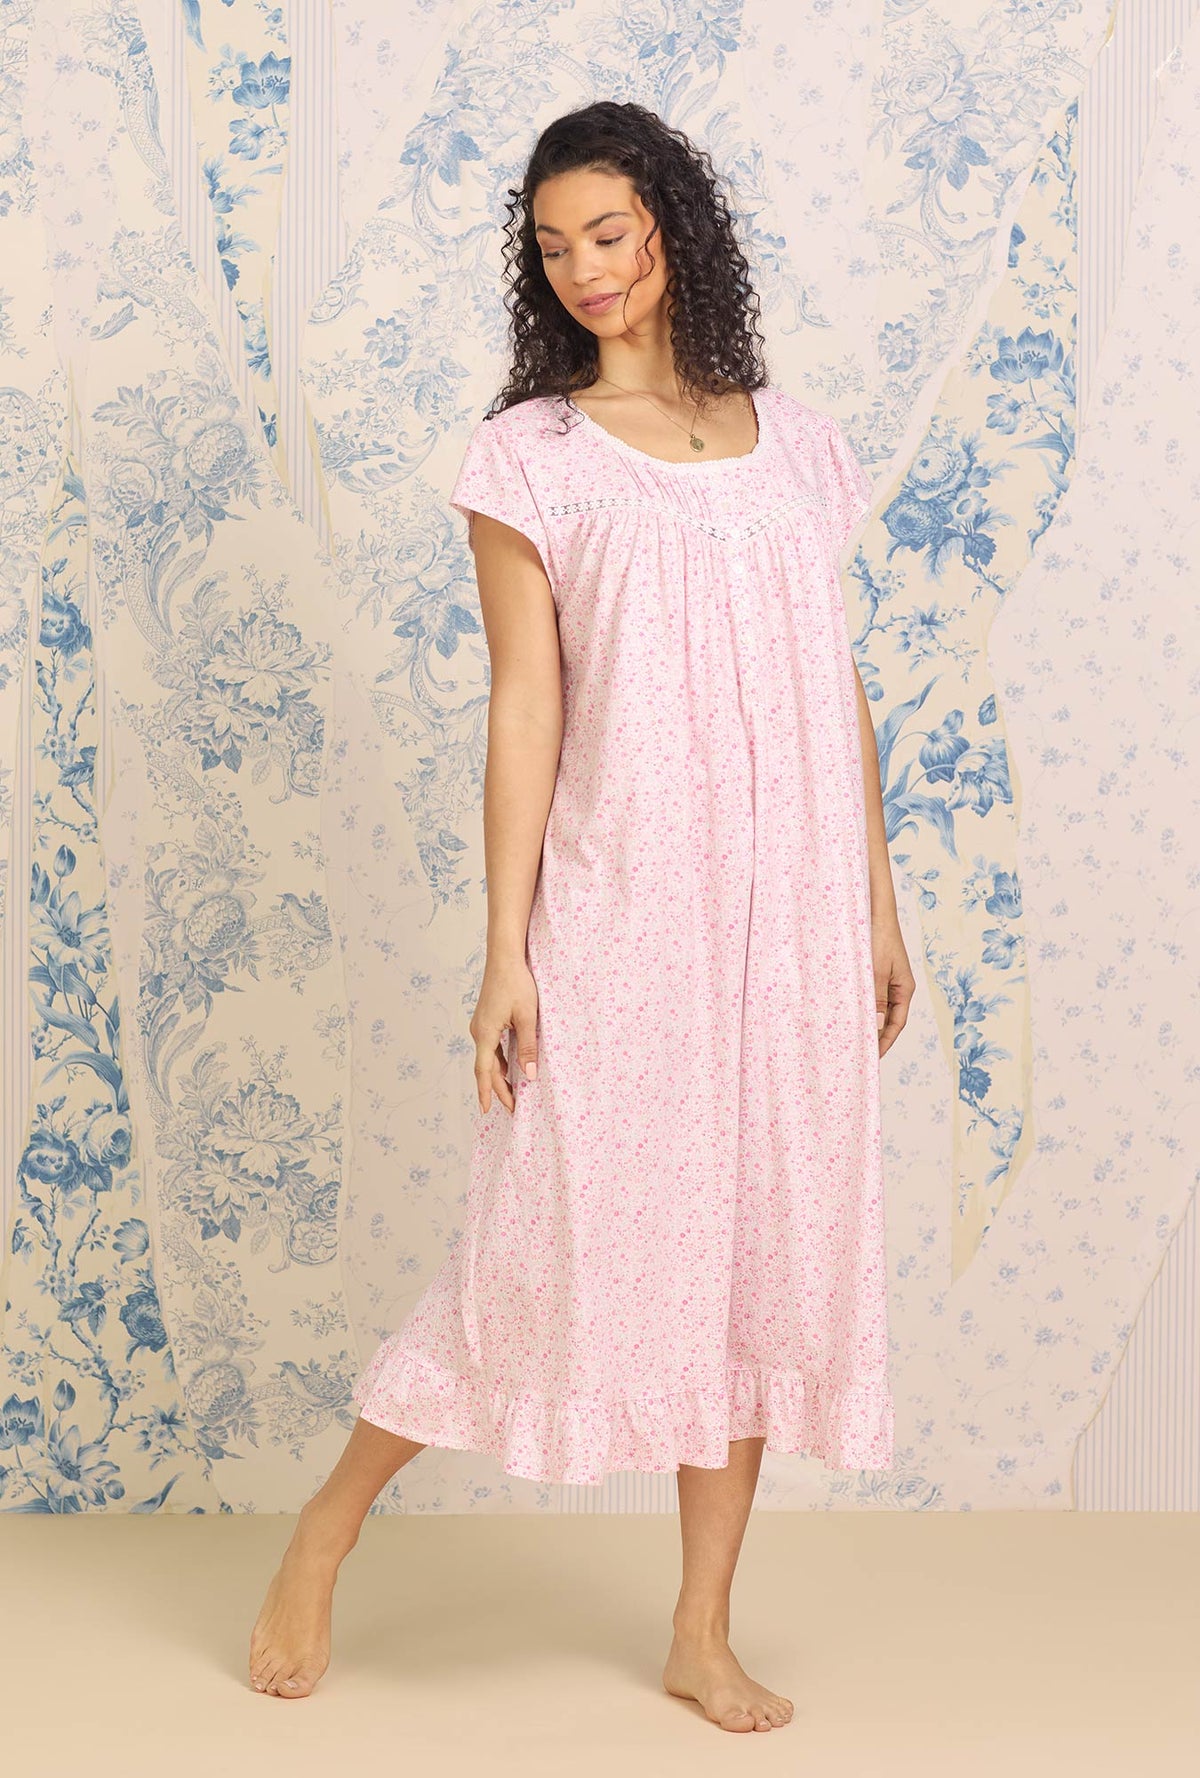  A lady wearing plus size pink Cotton Knit Long Cap Sleeve Nightgown with spring garden print